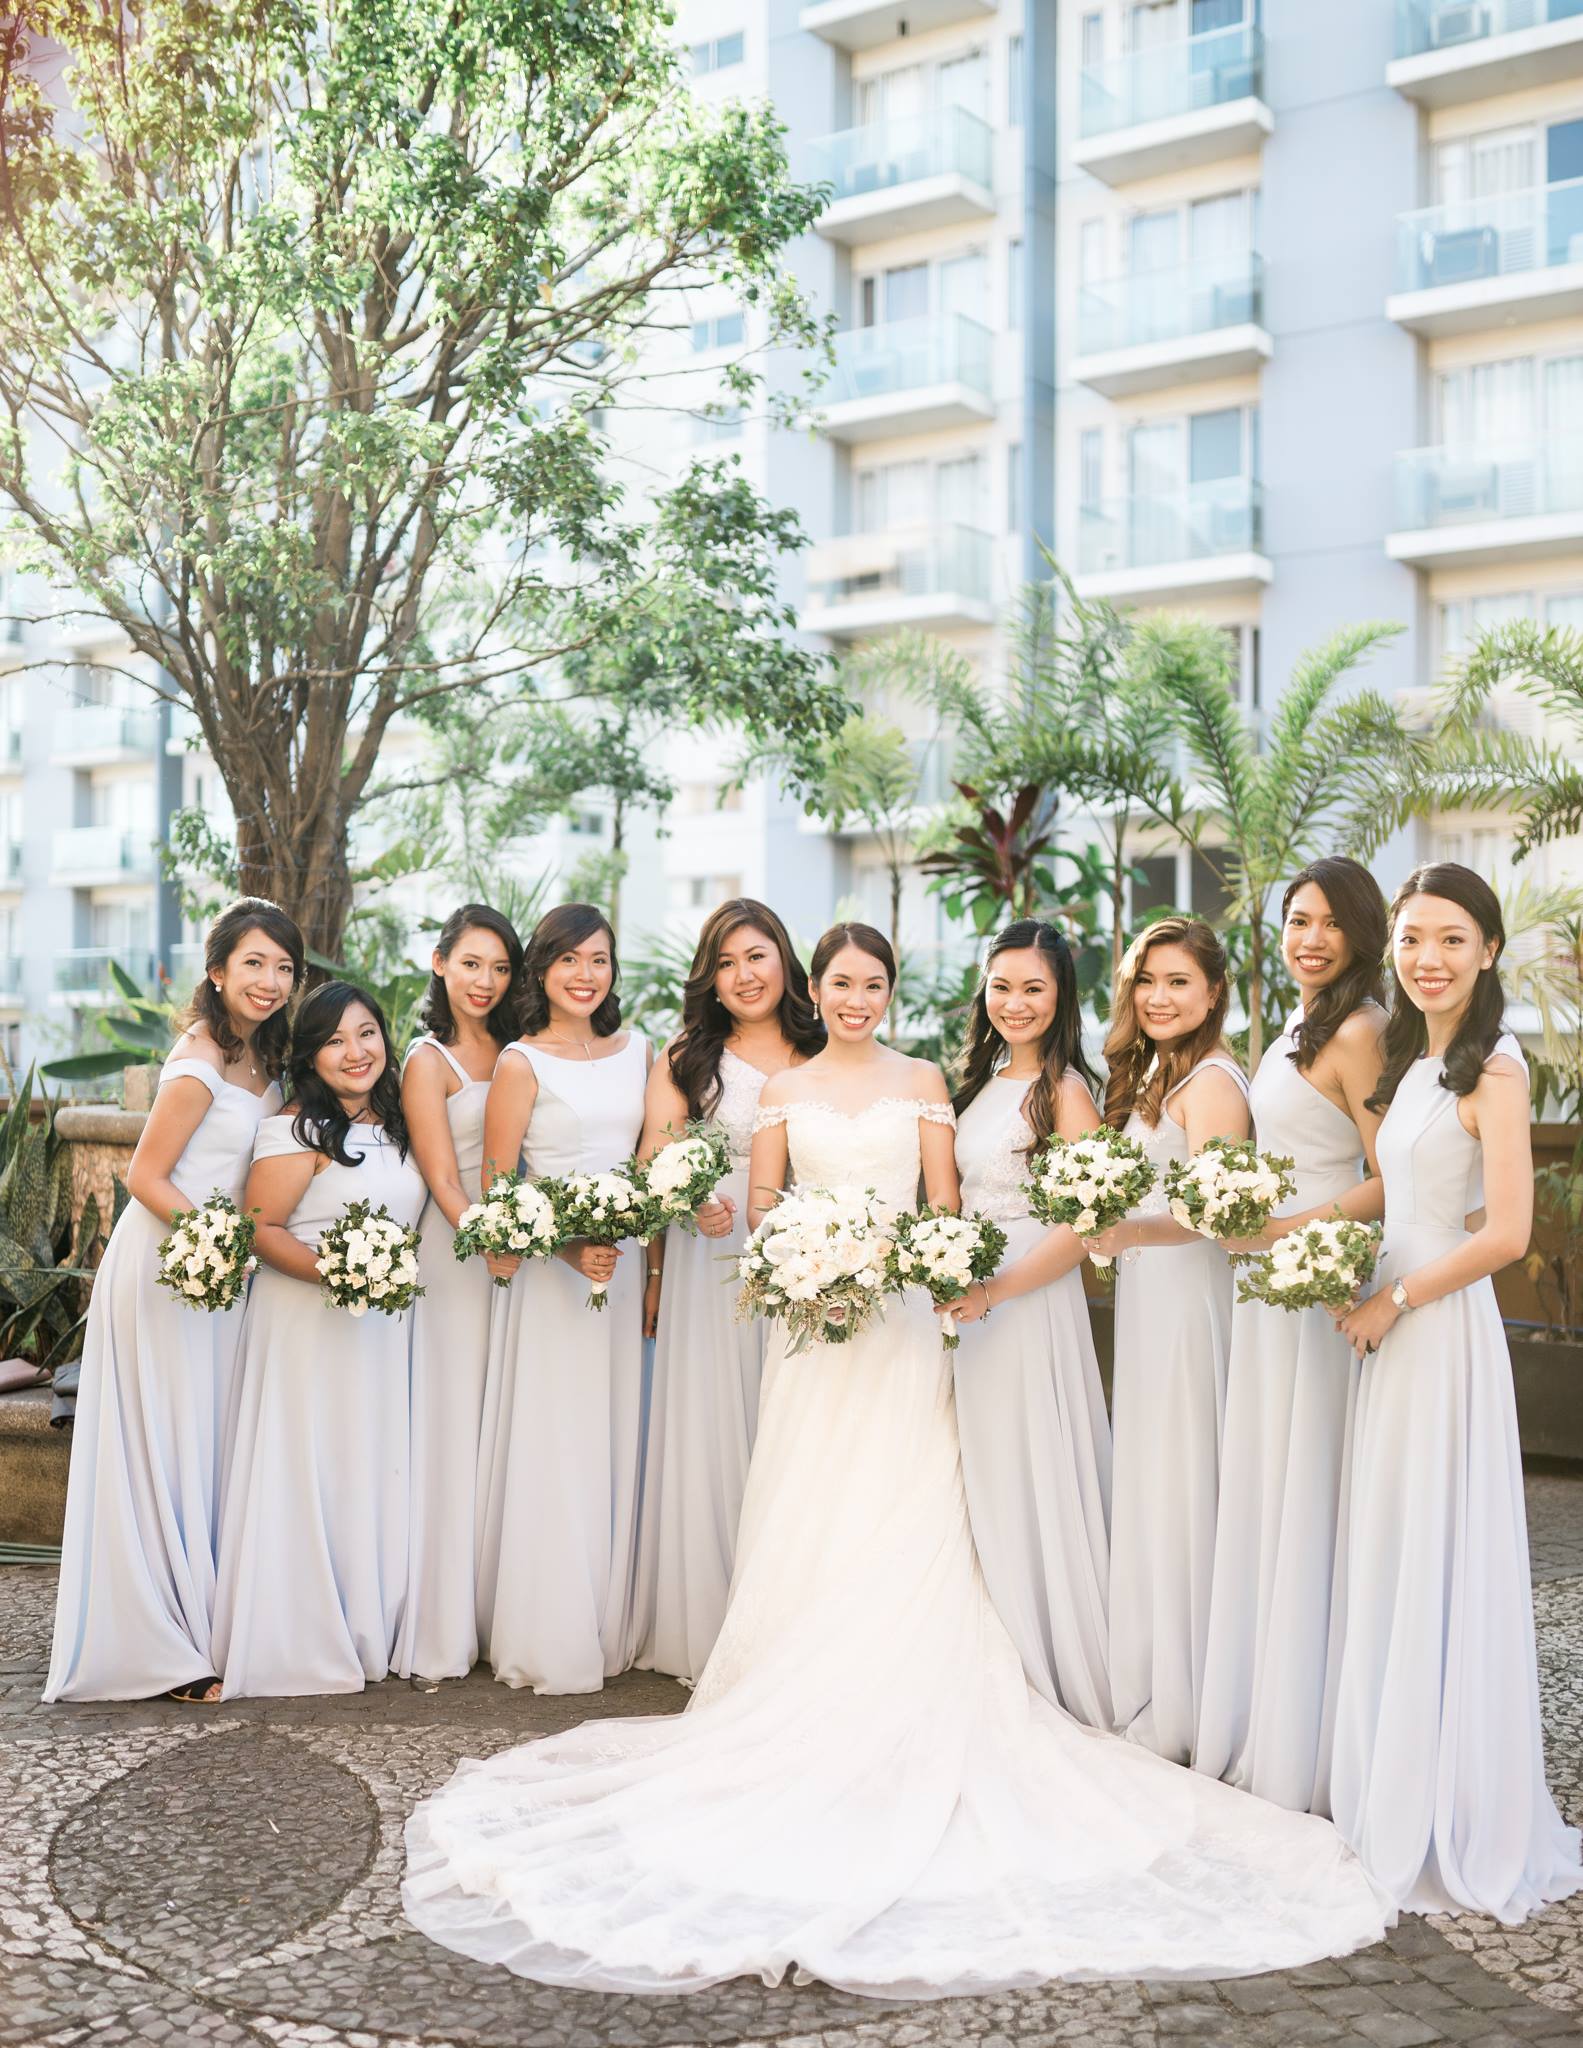 Bride squads love our simple yet elegant entourage gowns! The best part is, they're totally resusable for other events.